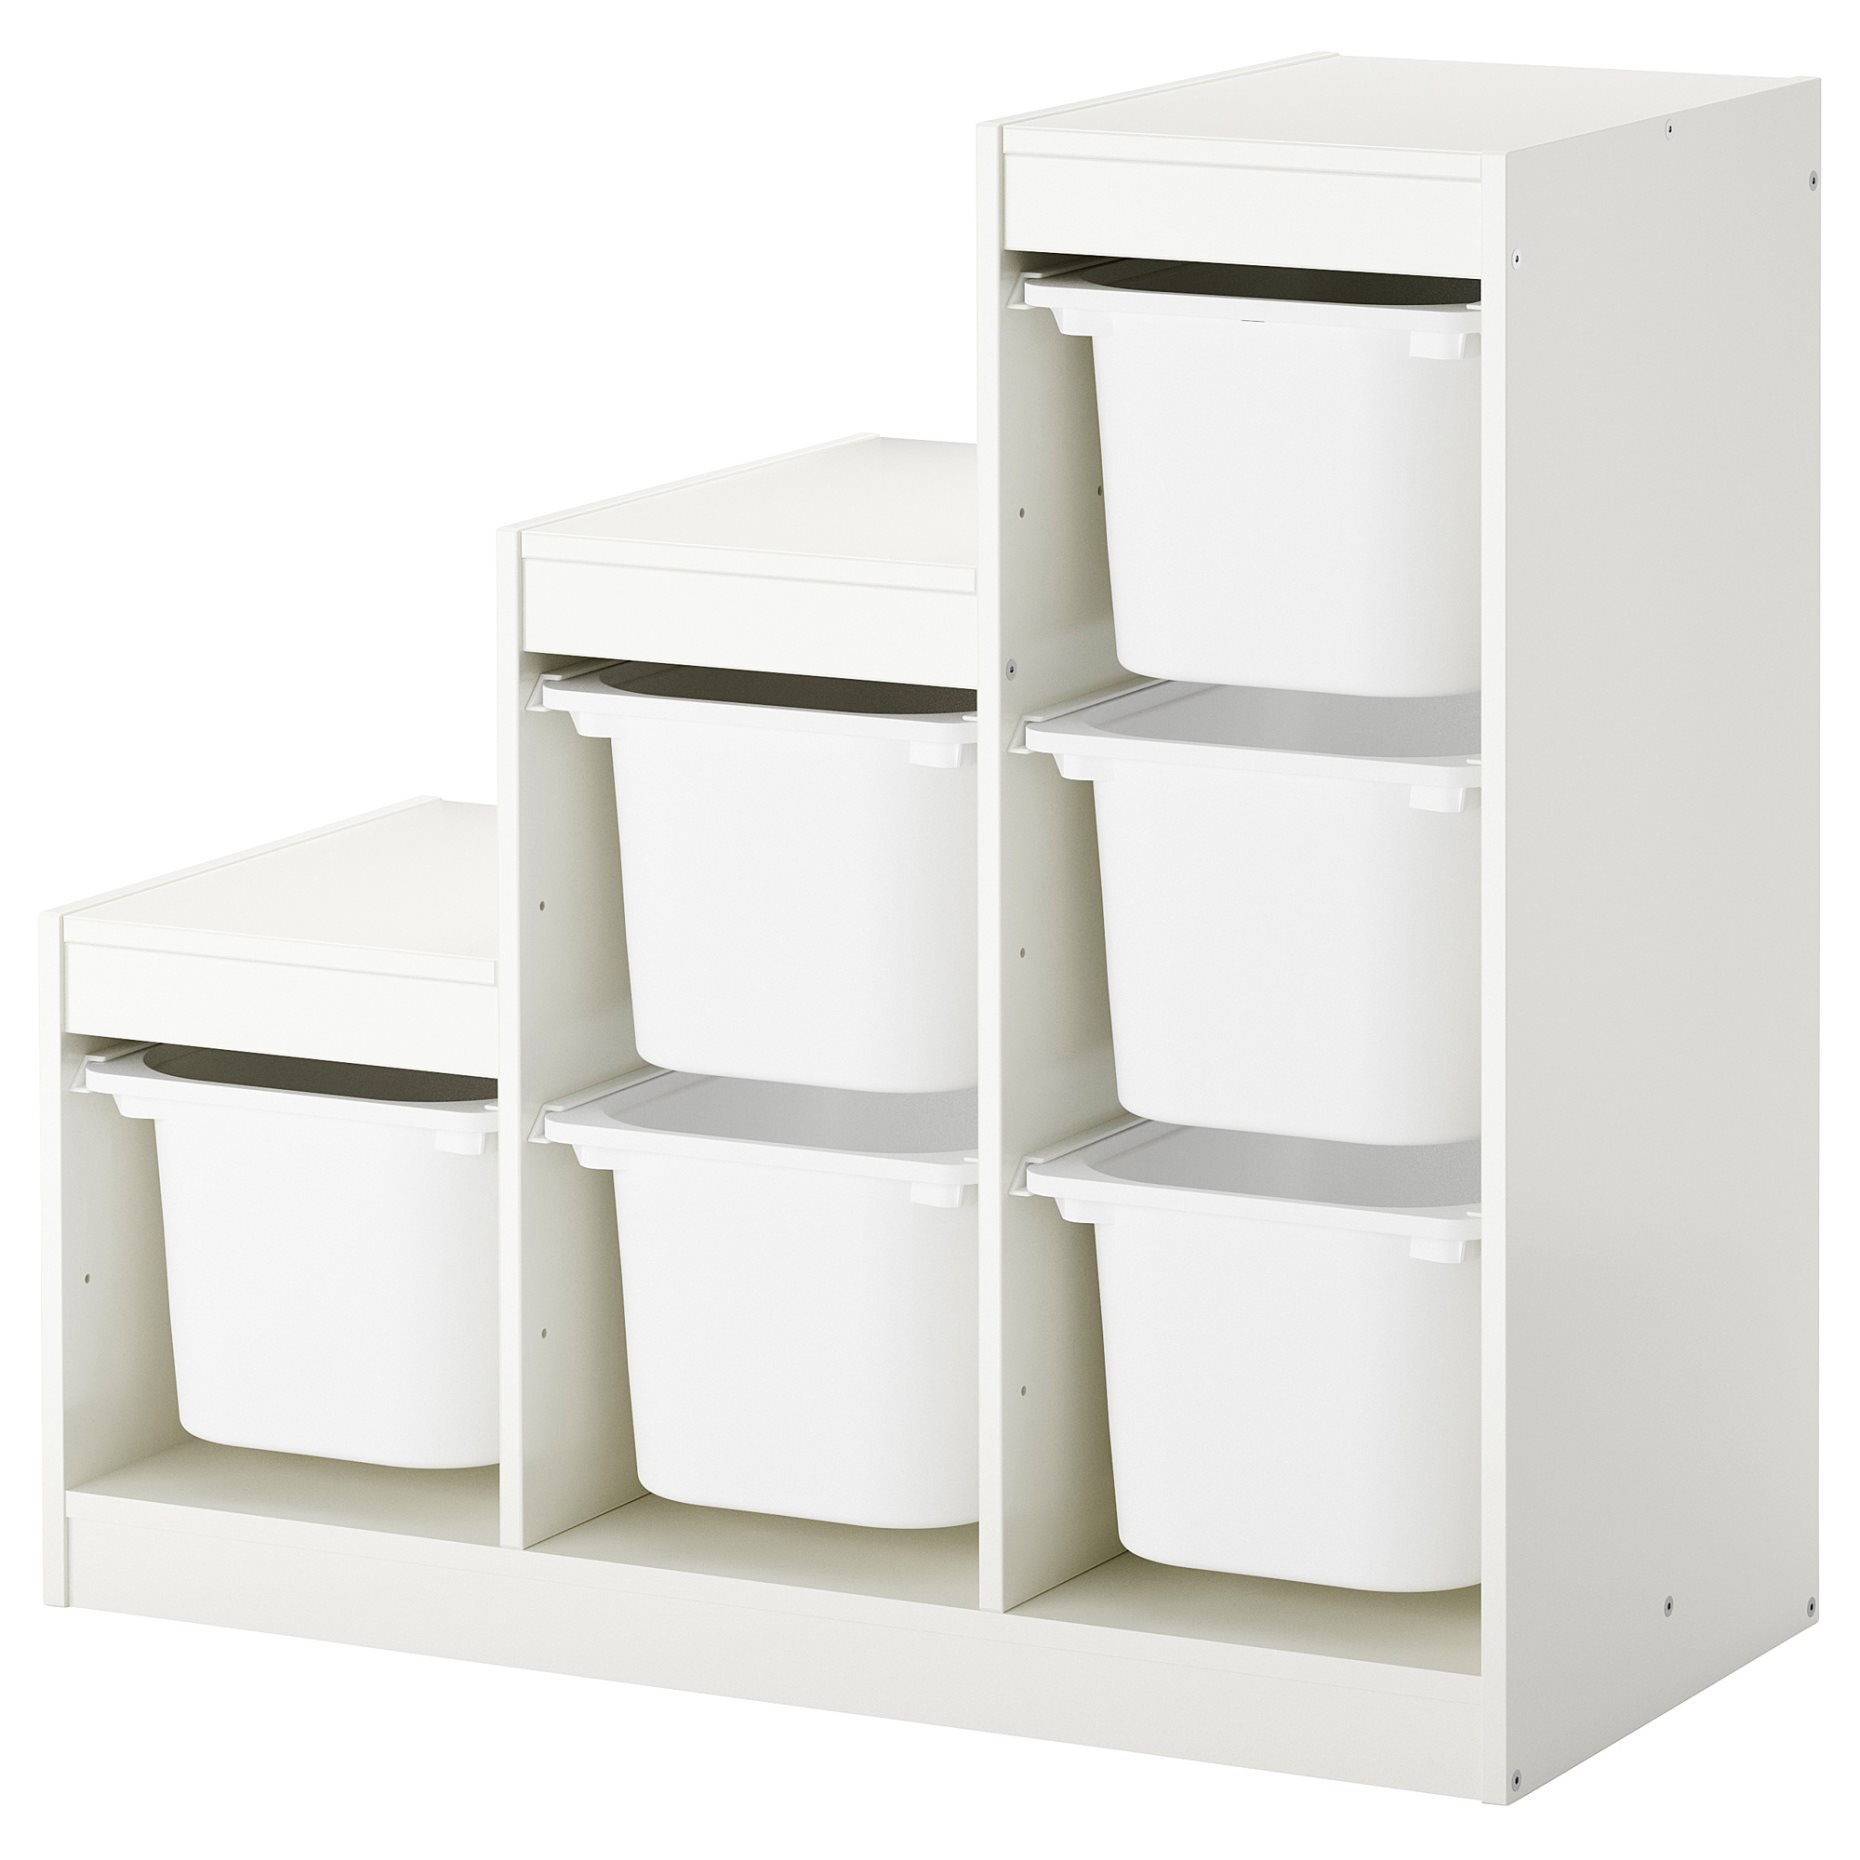 TROFAST, storage combination with boxes, 290.428.77